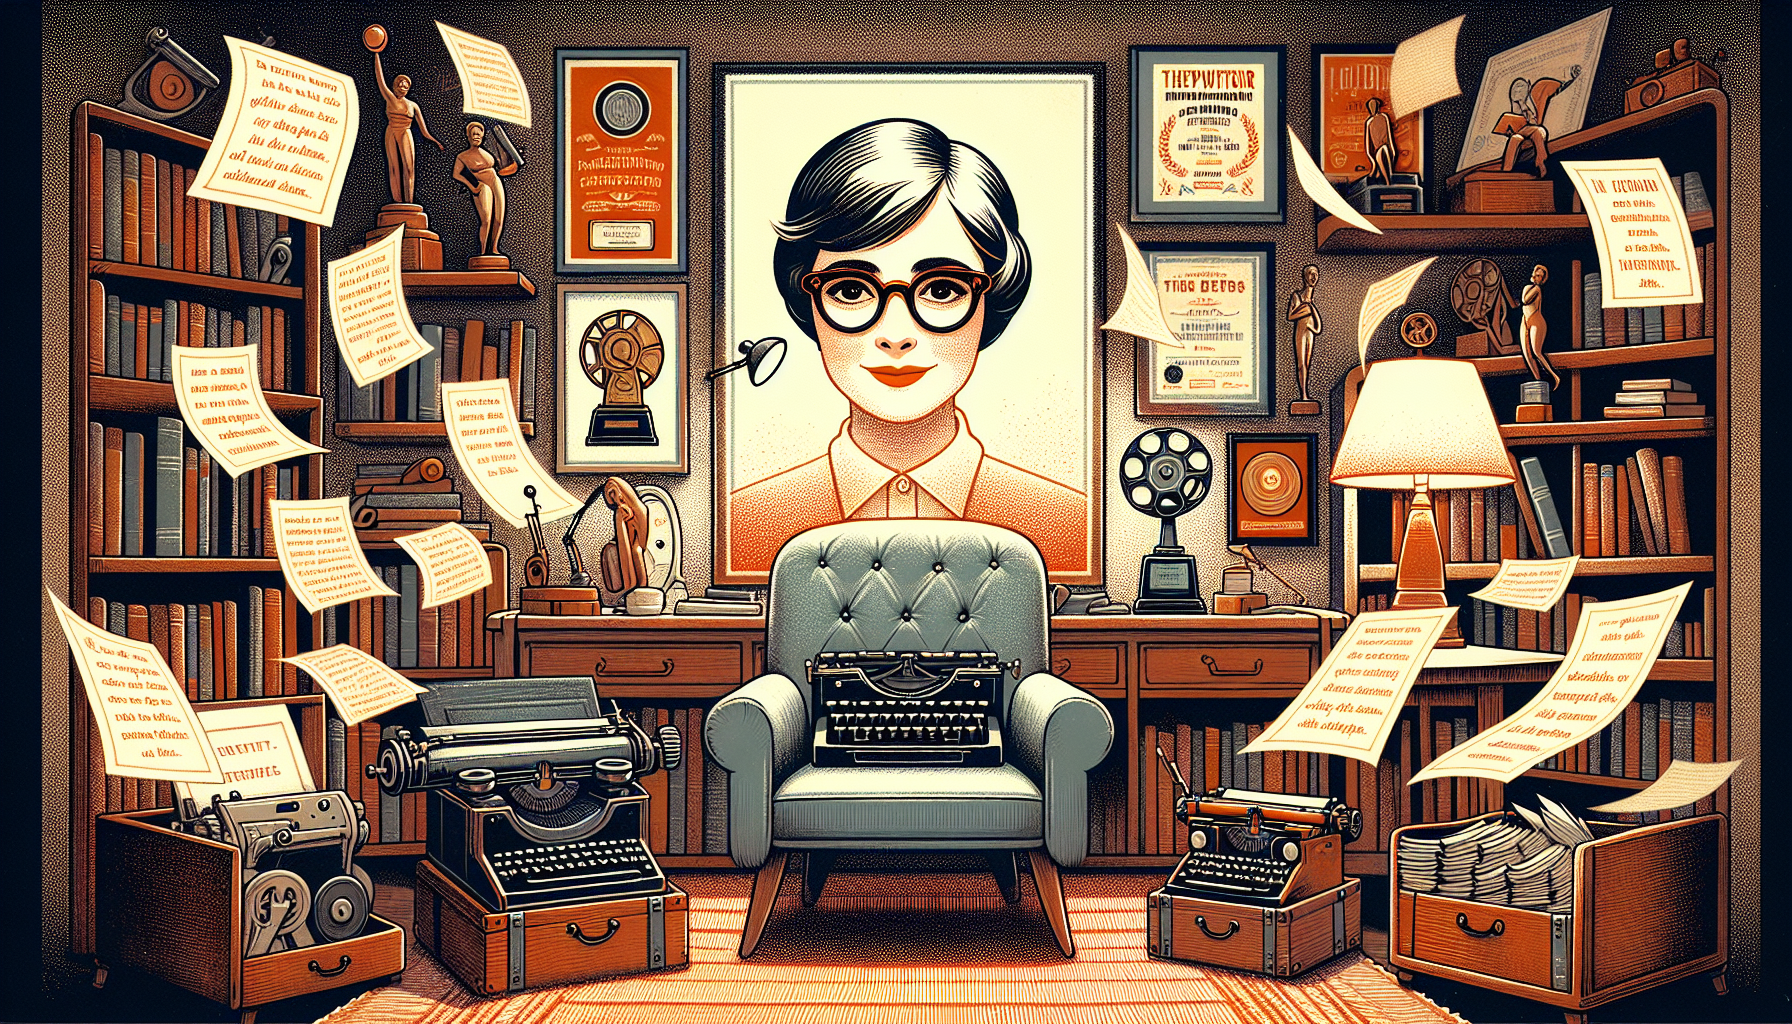 A cozy vintage-style study filled with awards, typewriters, and movie posters, featuring a whimsical portrait of Nora Ephron surrounded by floating pages with famous quotes from her films, set in a so